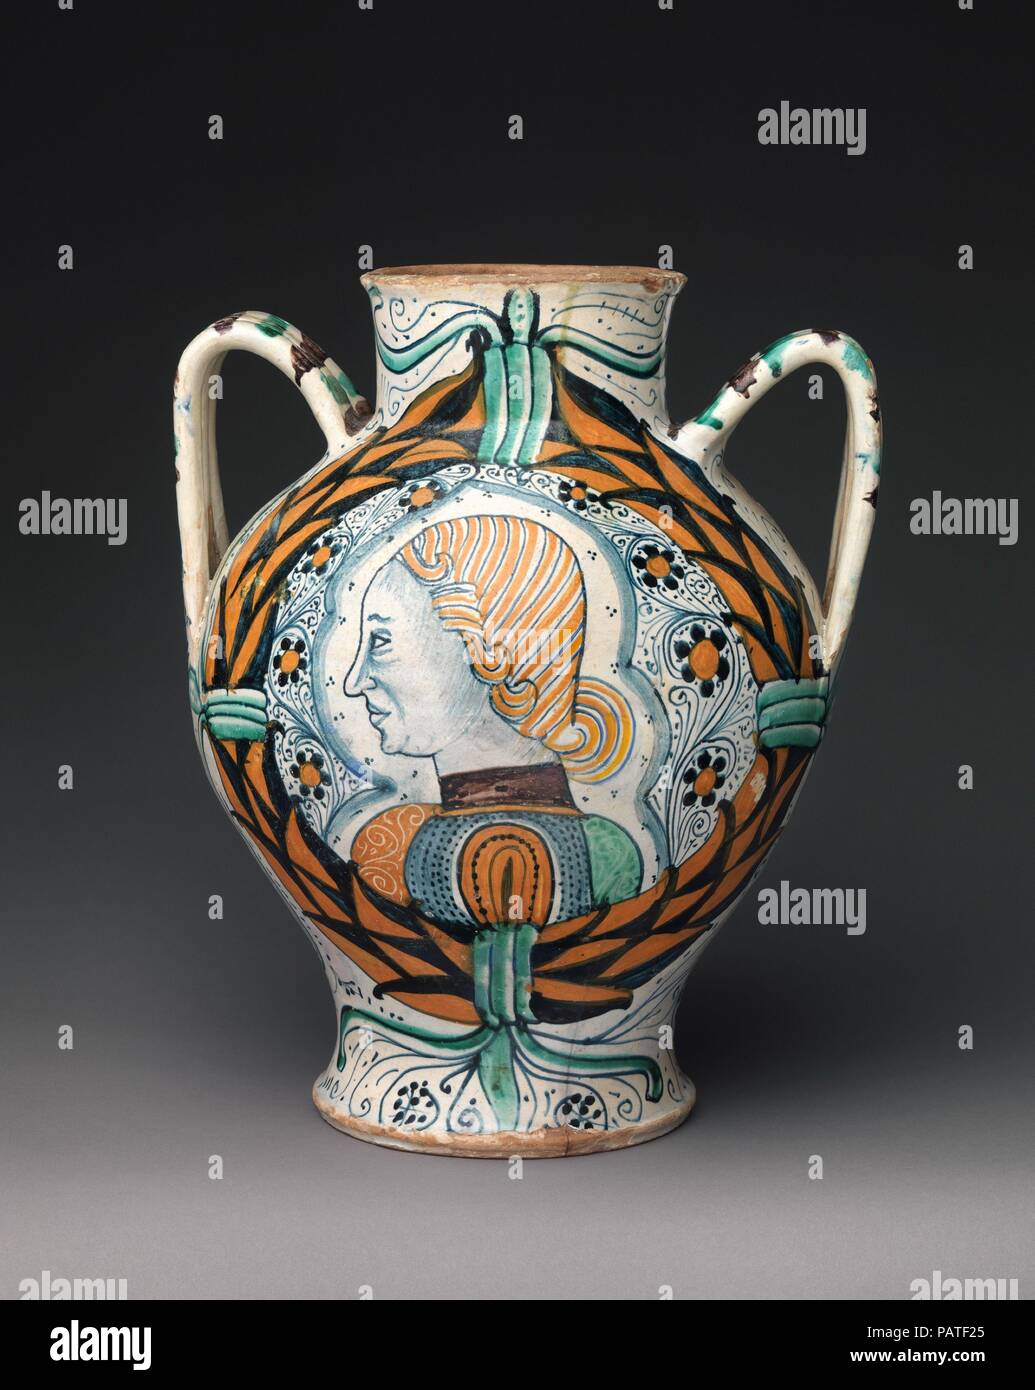 Two-handled pharmacy or storage jar with arms of the Orsini family and profile head of a man. Culture: Italian, probably Deruta. Dimensions: Overall (confirmed): 14 × 11 1/2 × 10 5/8 in. (35.6 × 29.2 × 27 cm). Date: ca. 1460-80.  The arms of the Orsini, a powerful Roman family, appear on one side of this jar, while the profile of a young man is delicately painted on the other. Numbers scratched into the underside note its weight when empty--useful information when measuring goods. Museum: Metropolitan Museum of Art, New York, USA. Stock Photo